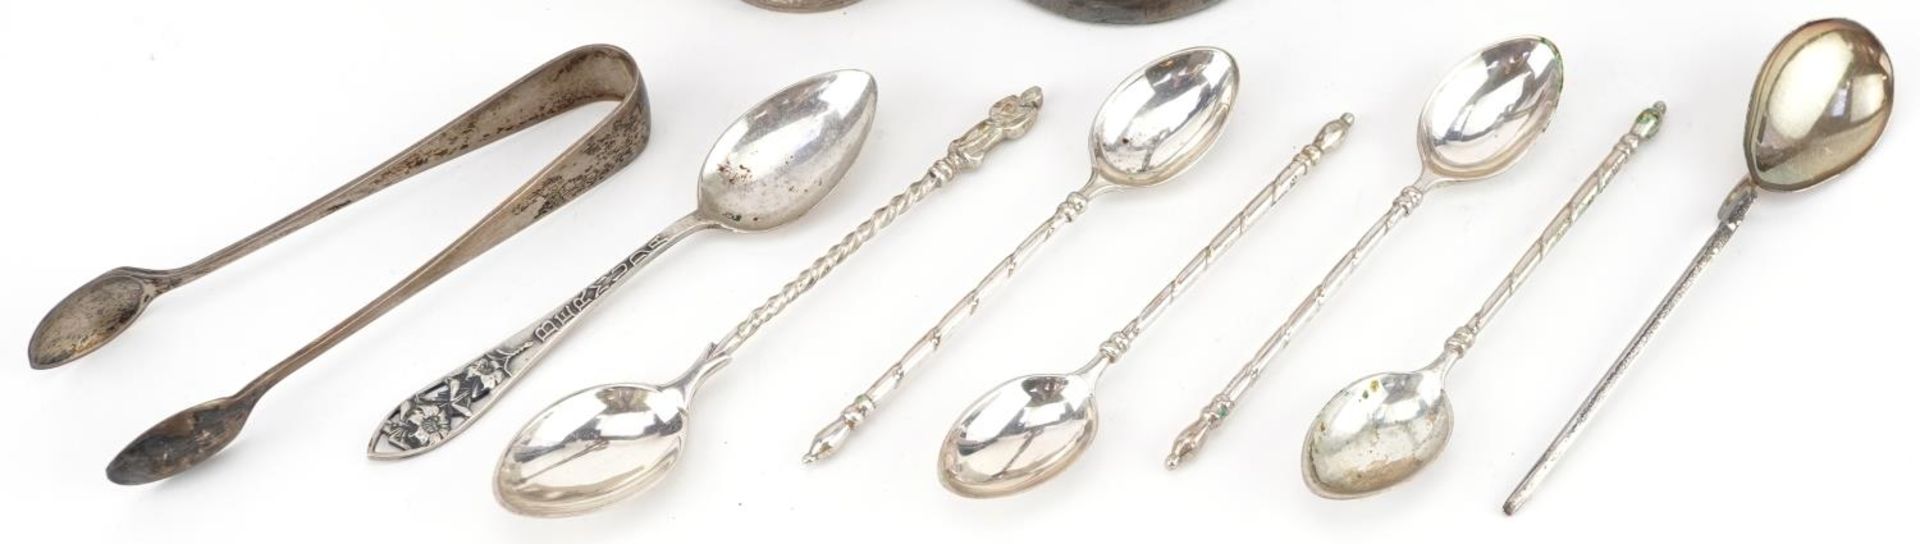 Silver objects comprising seven teaspoons, napkin ring, sugar tongs and bud vase, the largest 19.5cm - Image 3 of 8